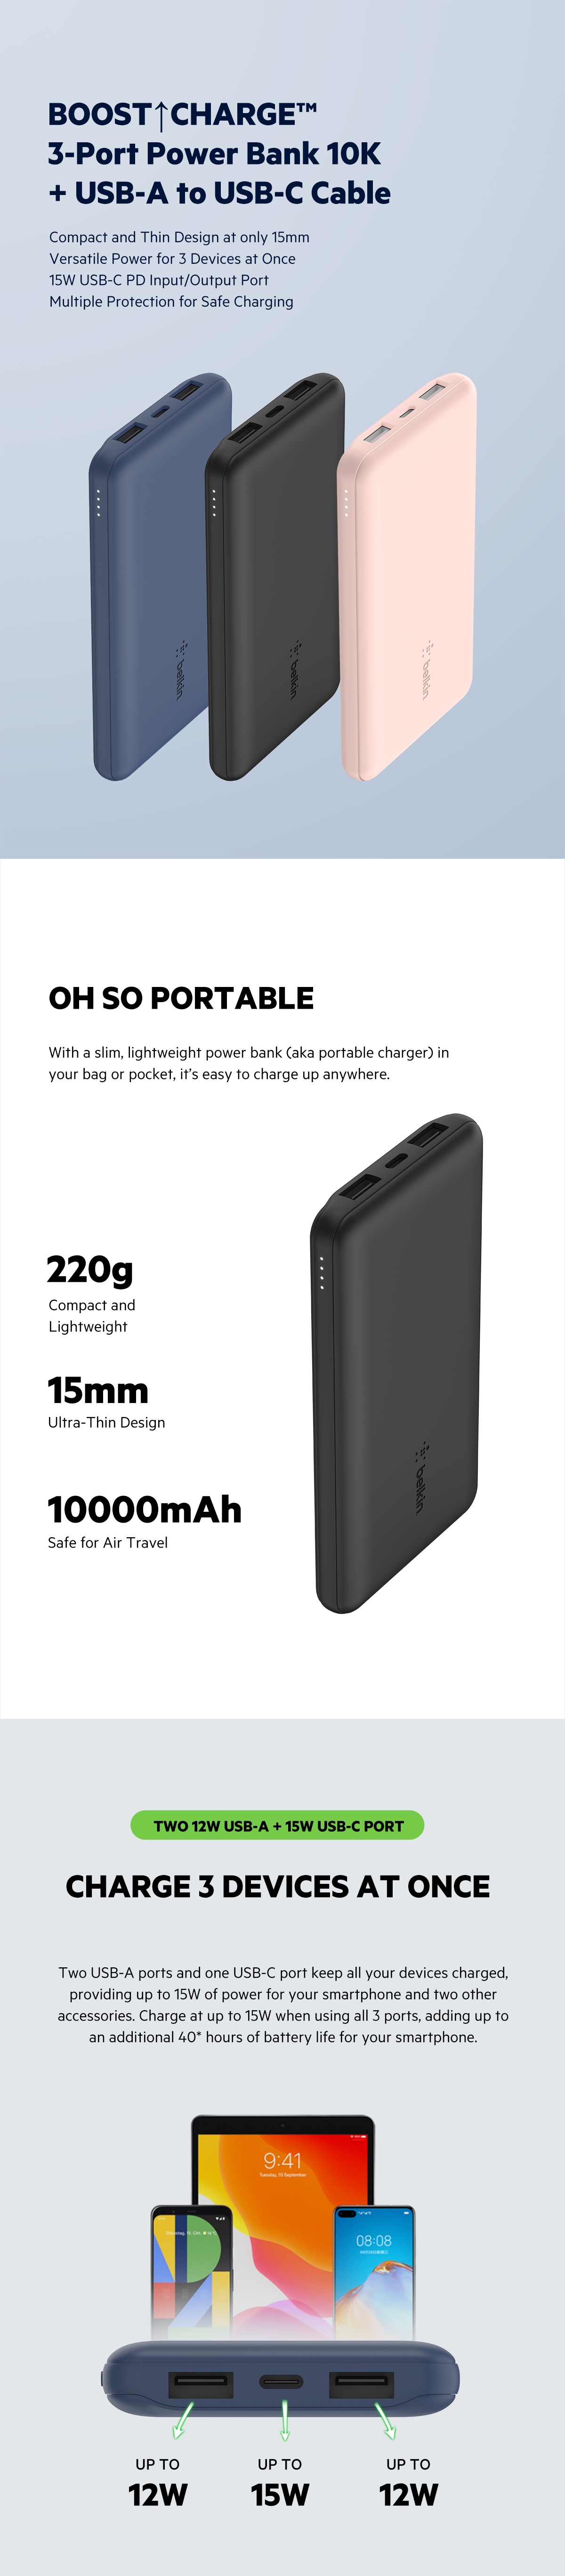 Belkin BOOST CHARGE™ 3-Port Power Bank 10K + USB-A to USB-C Cable